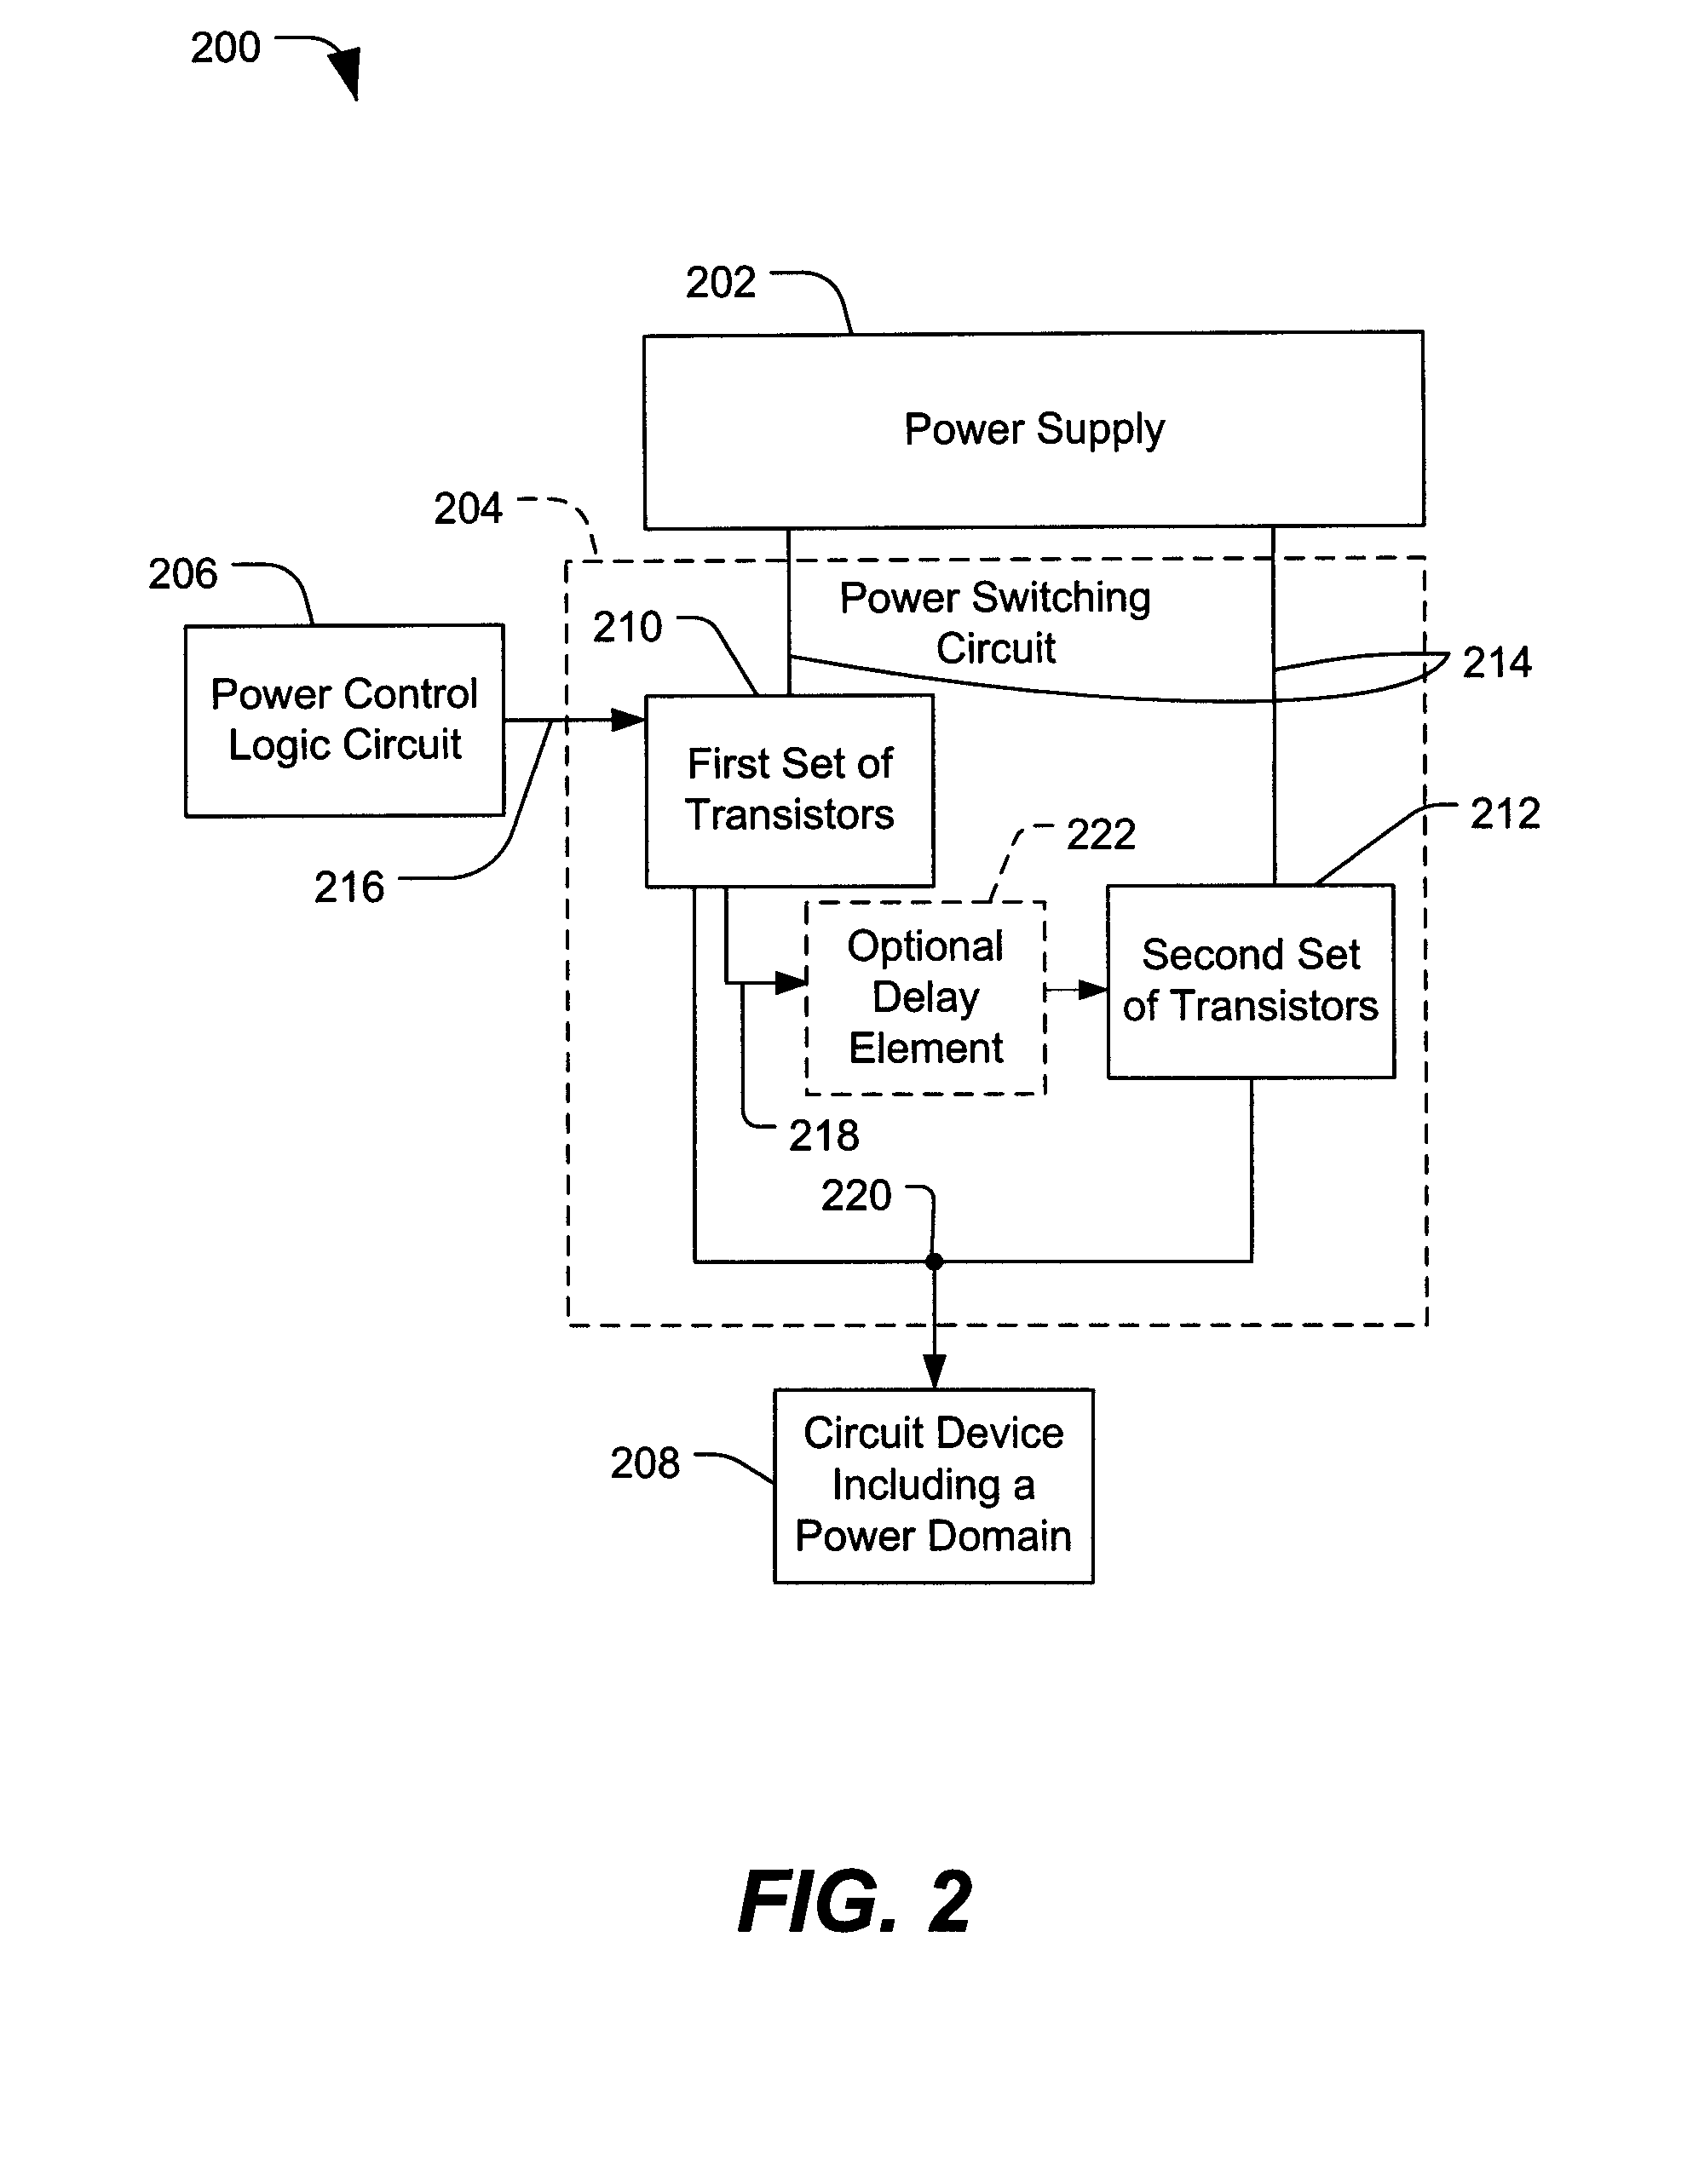 System and Method of Providing Power Using Switching Circuits